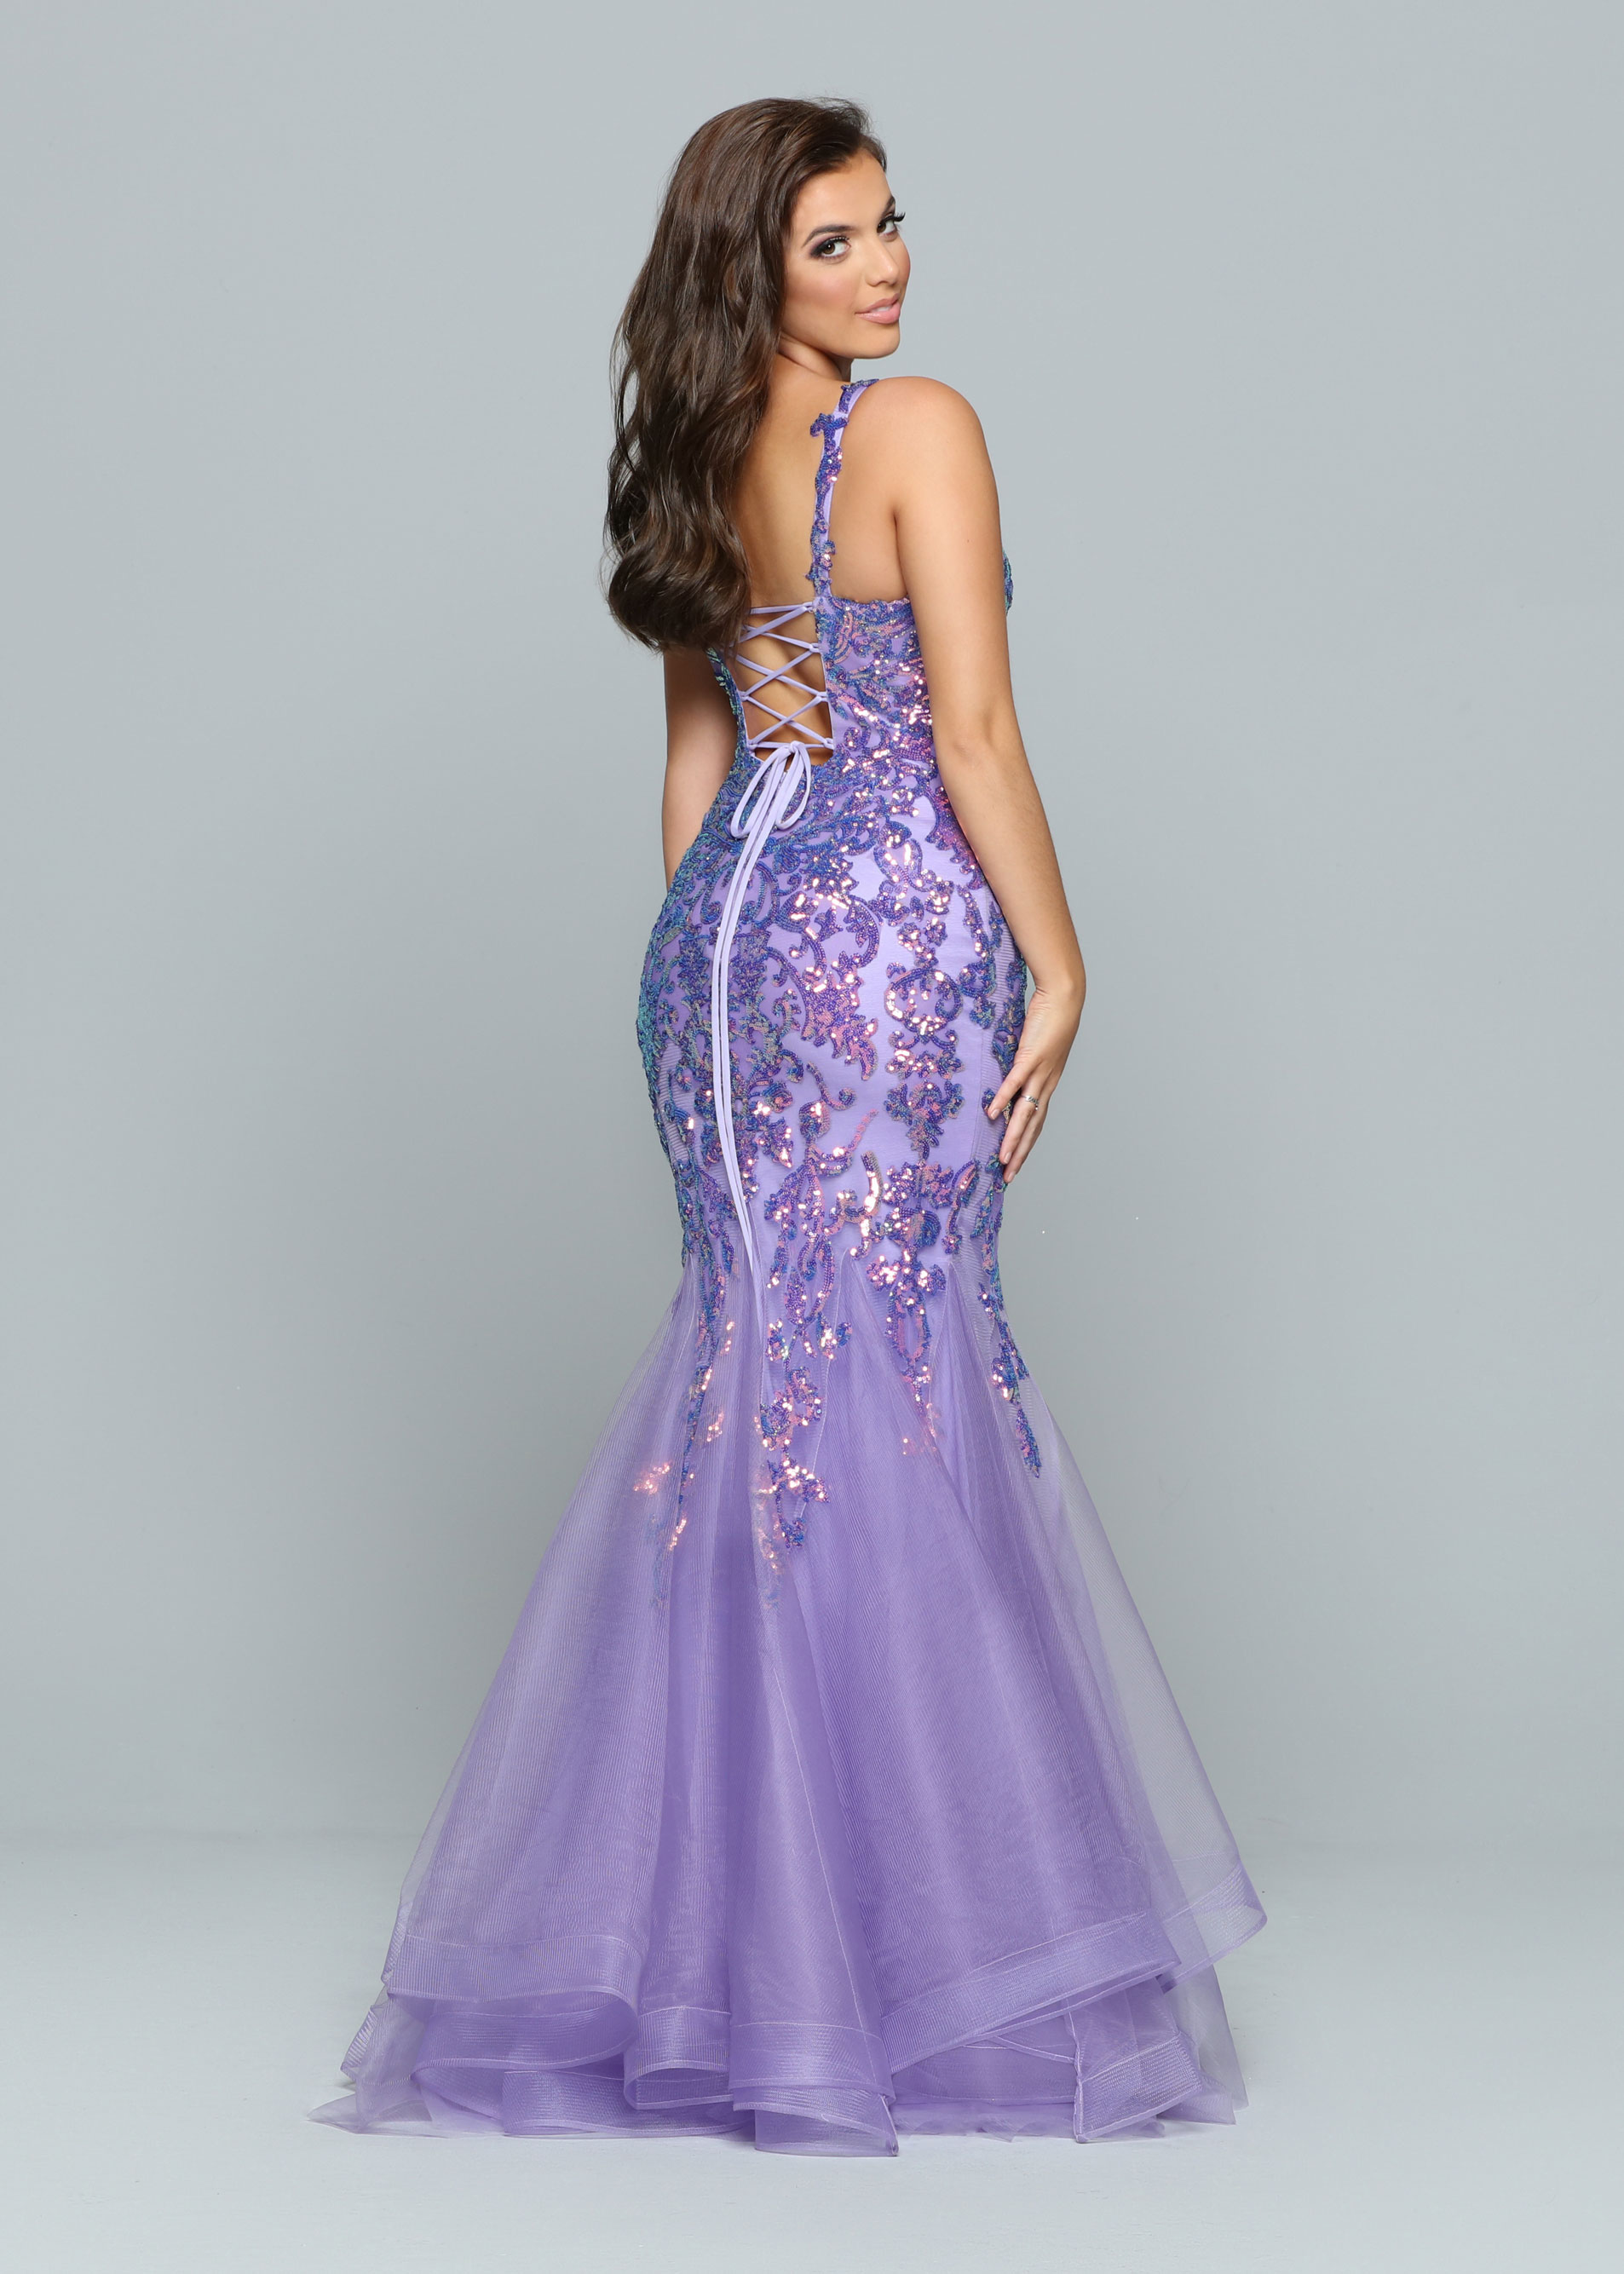 Image showing back view of style #72165